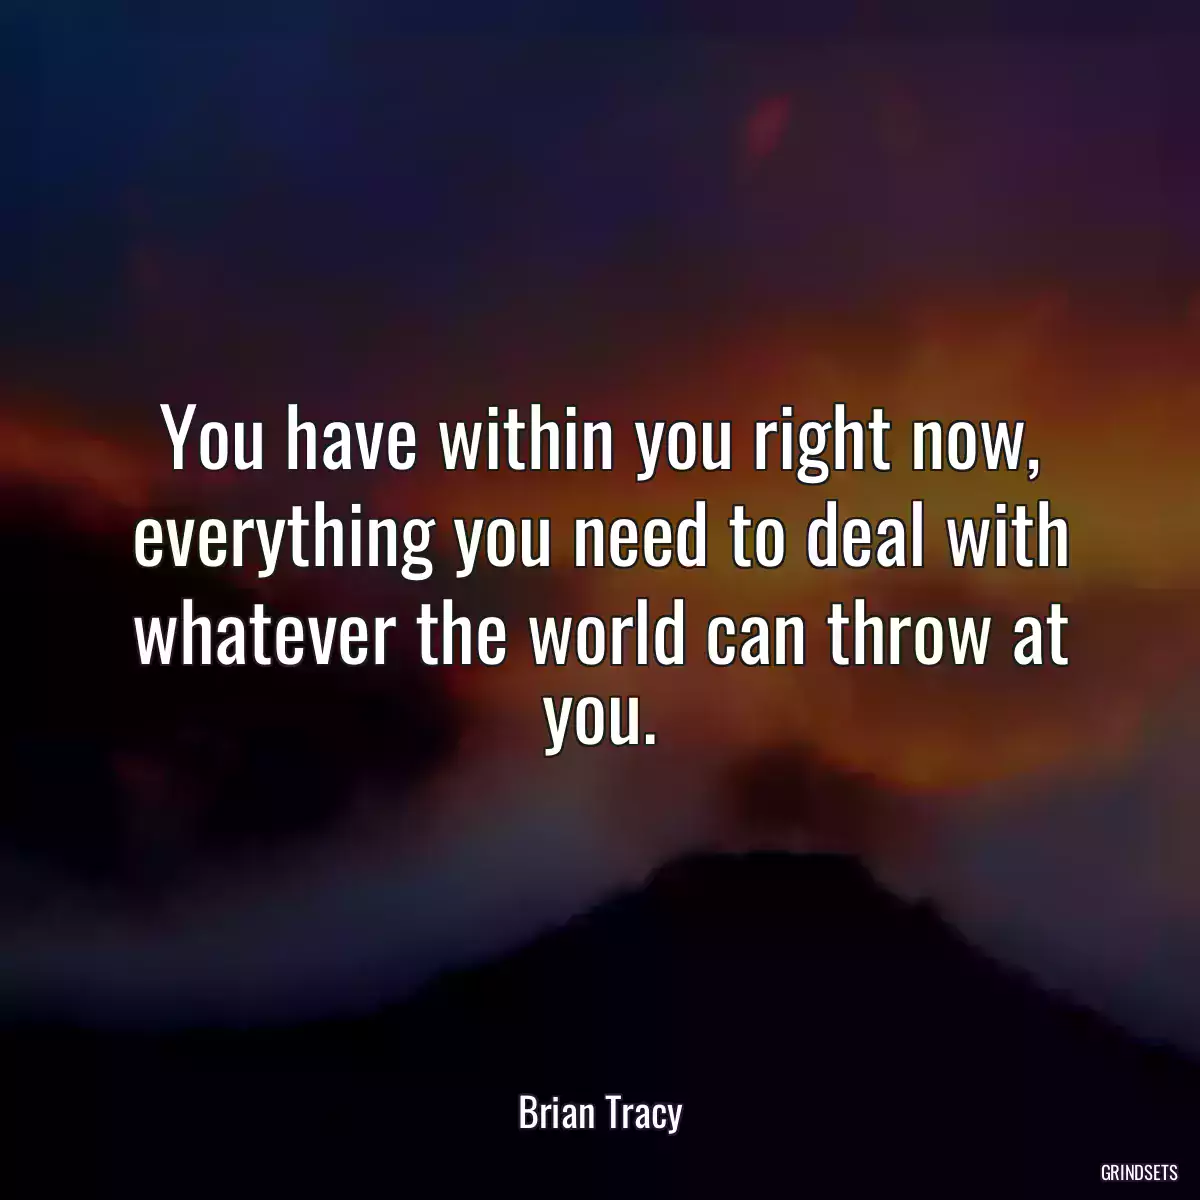 You have within you right now, everything you need to deal with whatever the world can throw at you.